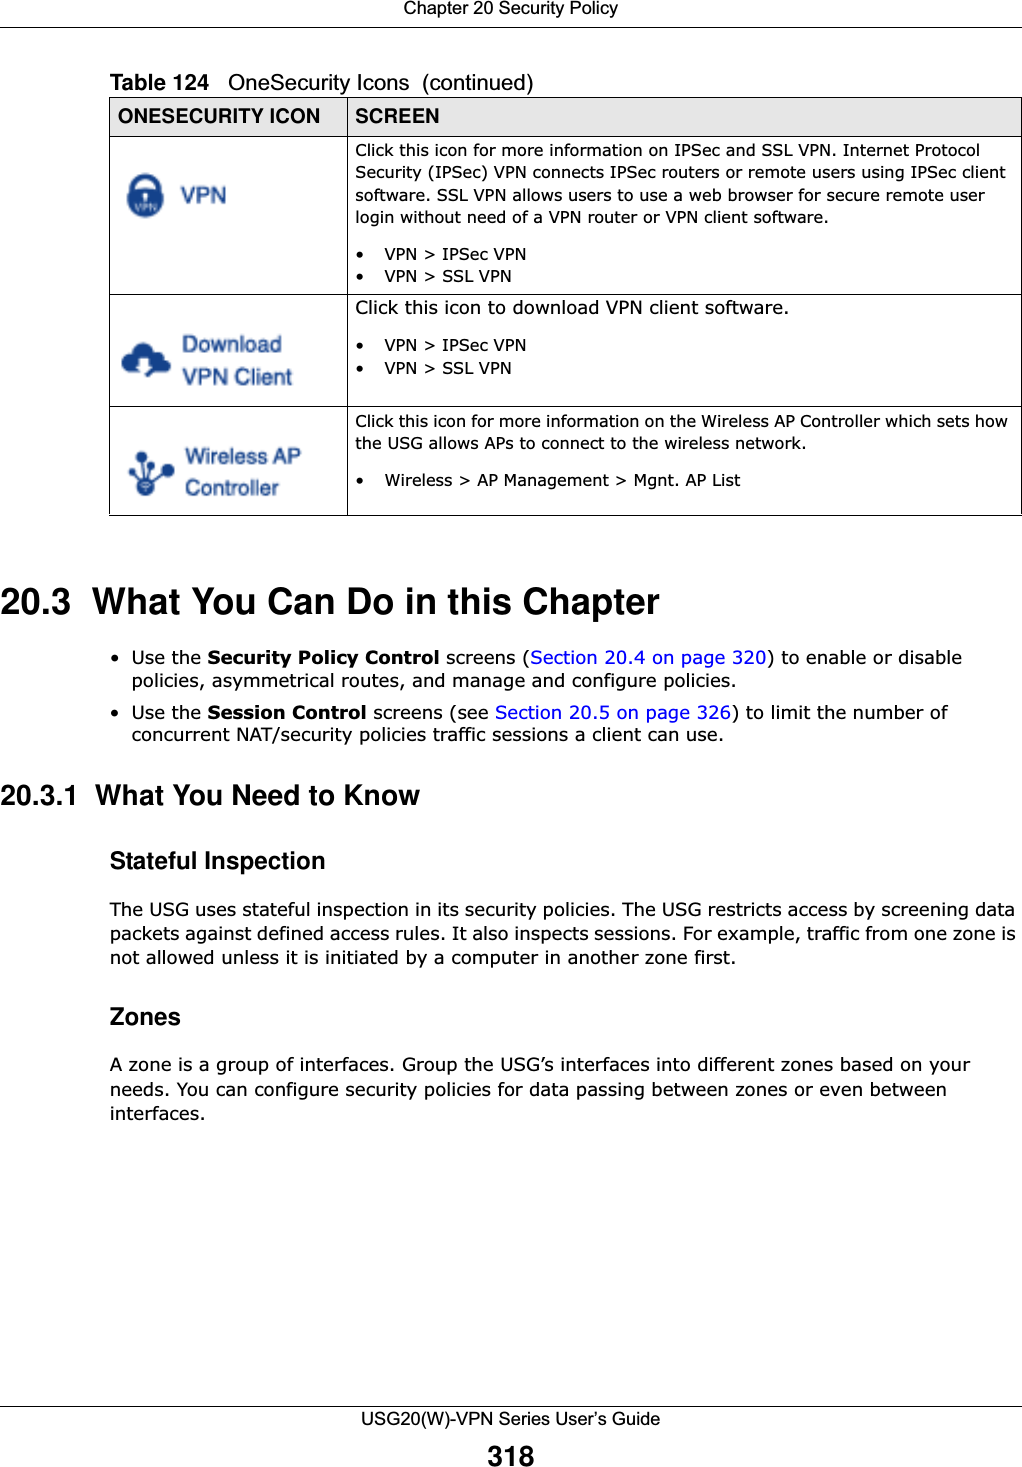 Chapter 20 Security PolicyUSG20(W)-VPN Series User’s Guide31820.3  What You Can Do in this Chapter•Use the Security Policy Control screens (Section 20.4 on page 320) to enable or disable policies, asymmetrical routes, and manage and configure policies. •Use the Session Control screens (see Section 20.5 on page 326) to limit the number of concurrent NAT/security policies traffic sessions a client can use. 20.3.1  What You Need to KnowStateful InspectionThe USG uses stateful inspection in its security policies. The USG restricts access by screening data packets against defined access rules. It also inspects sessions. For example, traffic from one zone is not allowed unless it is initiated by a computer in another zone first.ZonesA zone is a group of interfaces. Group the USG’s interfaces into different zones based on your needs. You can configure security policies for data passing between zones or even between interfaces. Click this icon for more information on IPSec and SSL VPN. Internet Protocol Security (IPSec) VPN connects IPSec routers or remote users using IPSec client software. SSL VPN allows users to use a web browser for secure remote user login without need of a VPN router or VPN client software.• VPN &gt; IPSec VPN•VPN &gt; SSL VPNClick this icon to download VPN client software.• VPN &gt; IPSec VPN•VPN &gt; SSL VPNClick this icon for more information on the Wireless AP Controller which sets how the USG allows APs to connect to the wireless network.• Wireless &gt; AP Management &gt; Mgnt. AP ListTable 124   OneSecurity Icons  (continued)ONESECURITY ICON SCREEN